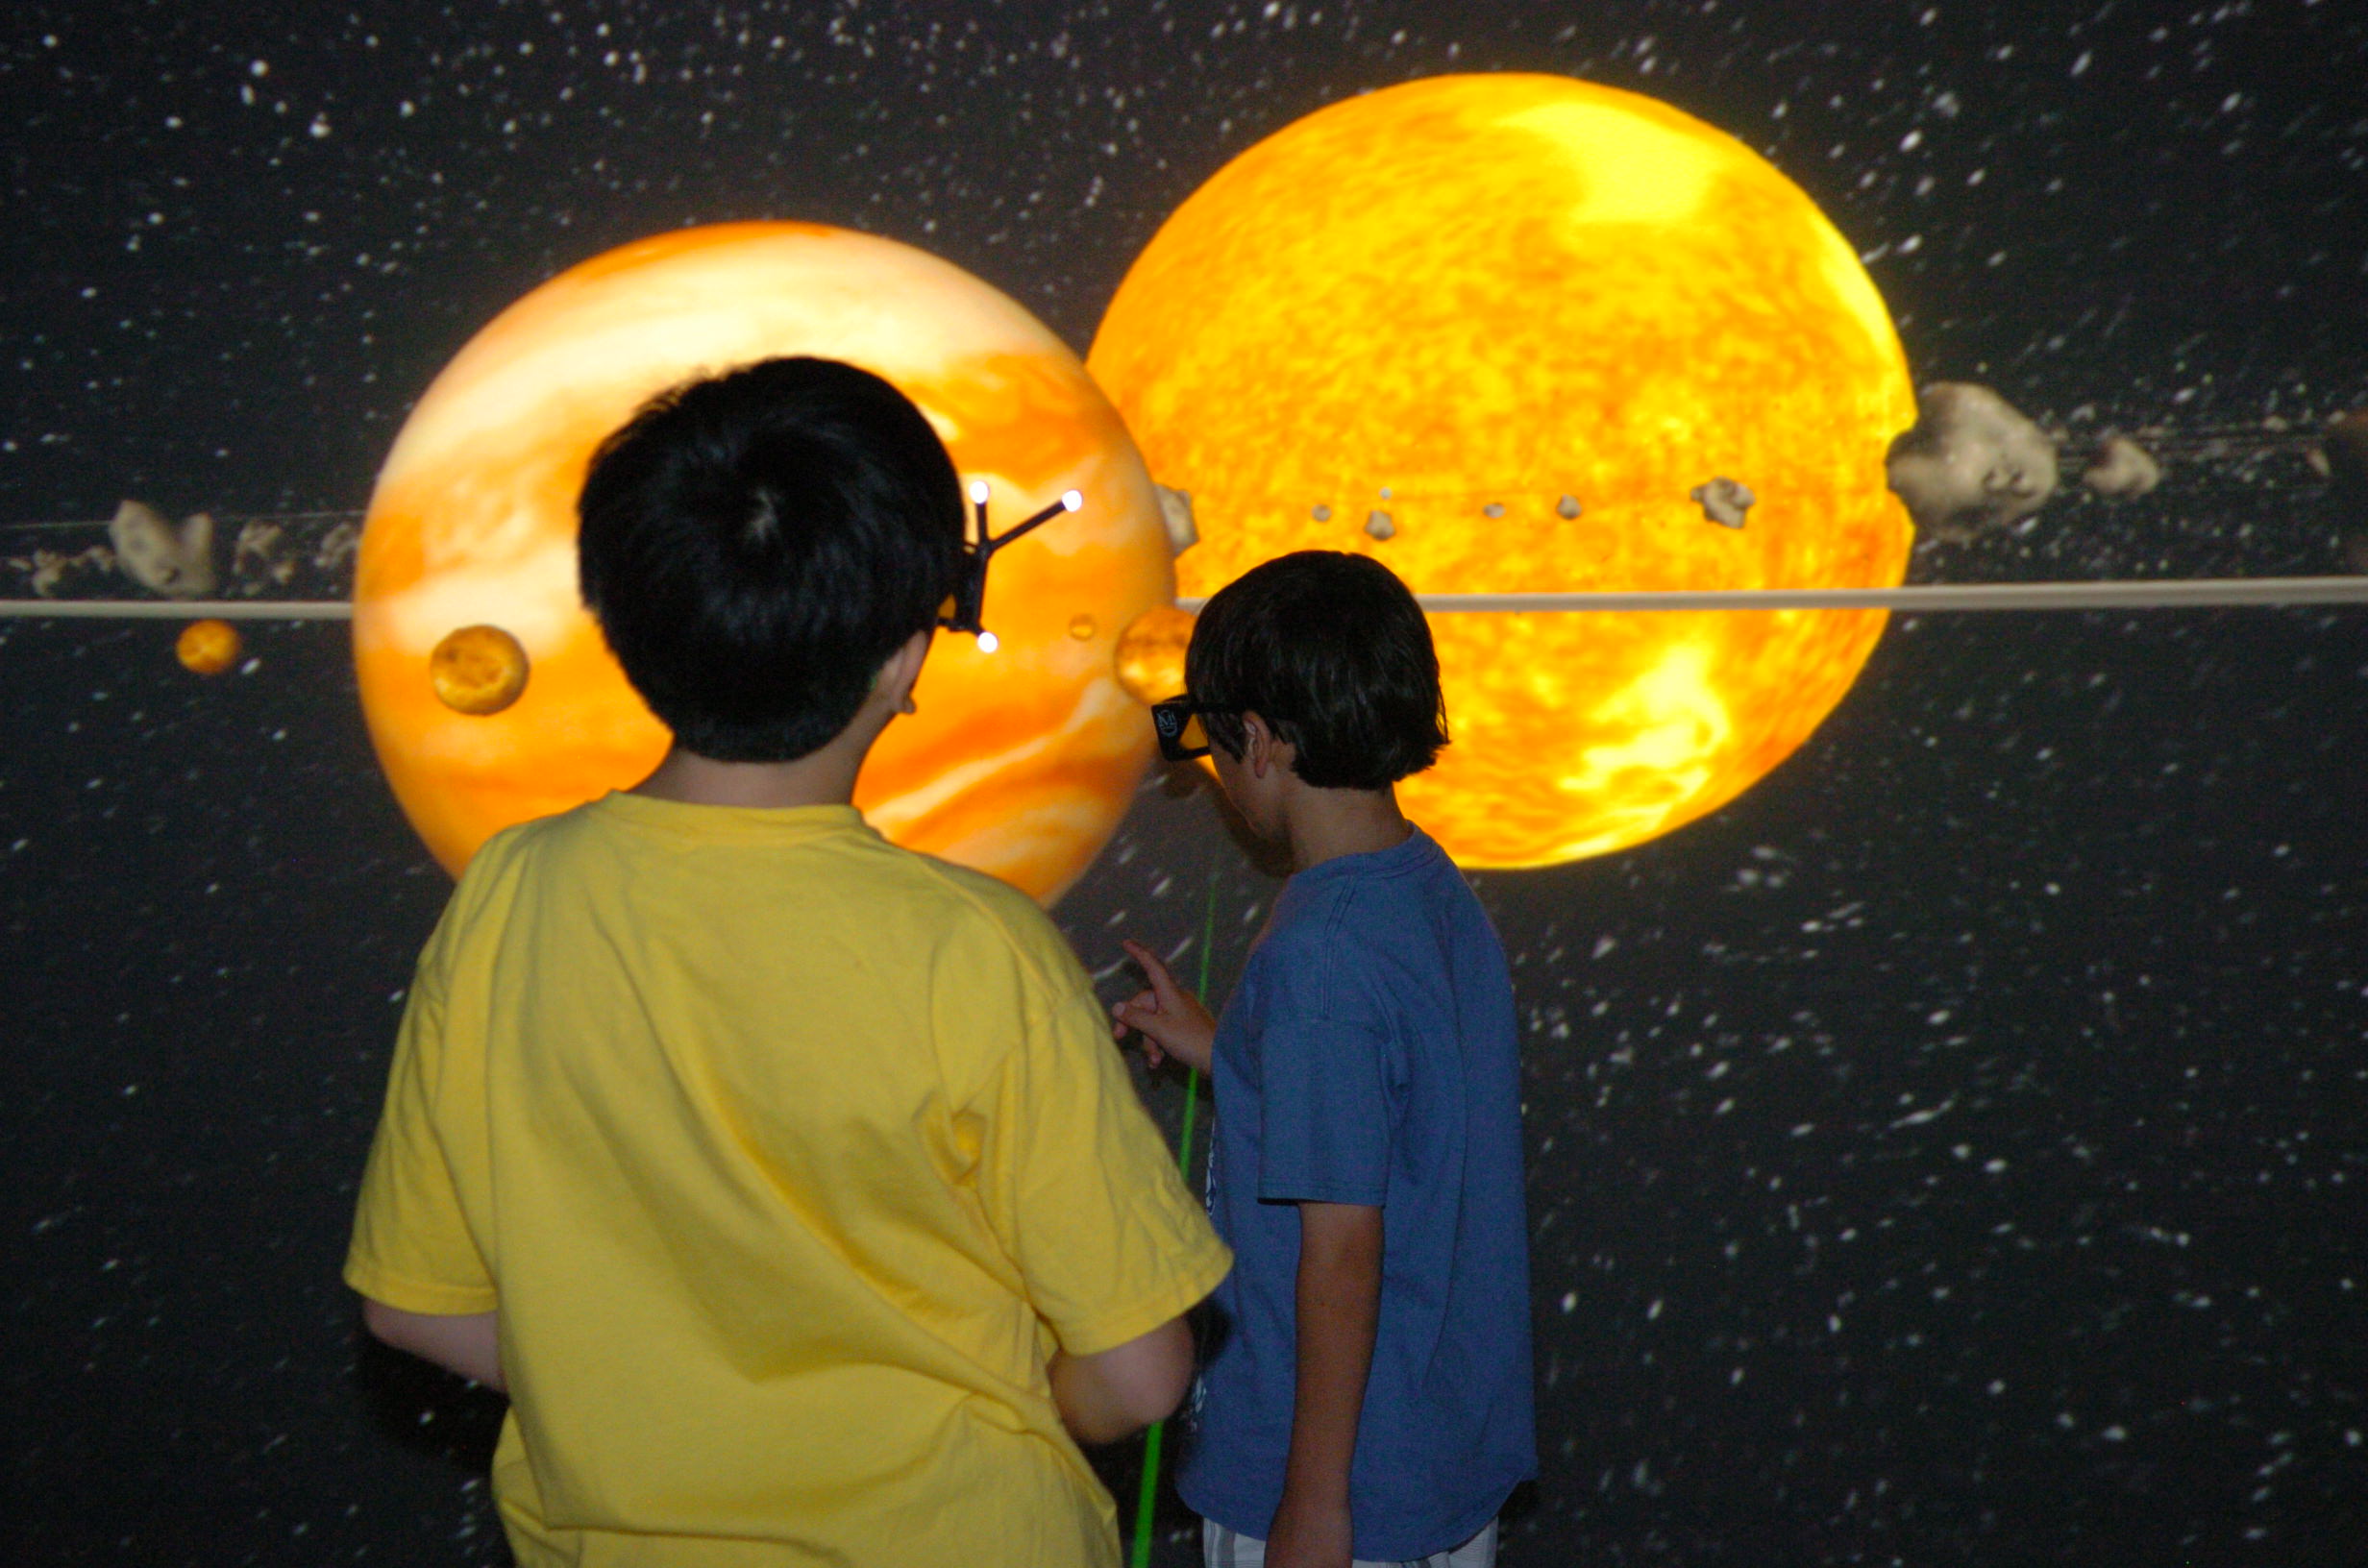 Sam from Korea and Korbyn from the United States experiencing the Solar System in 3D Interactive Cave Environment. Courtesy of JTM Concepts.